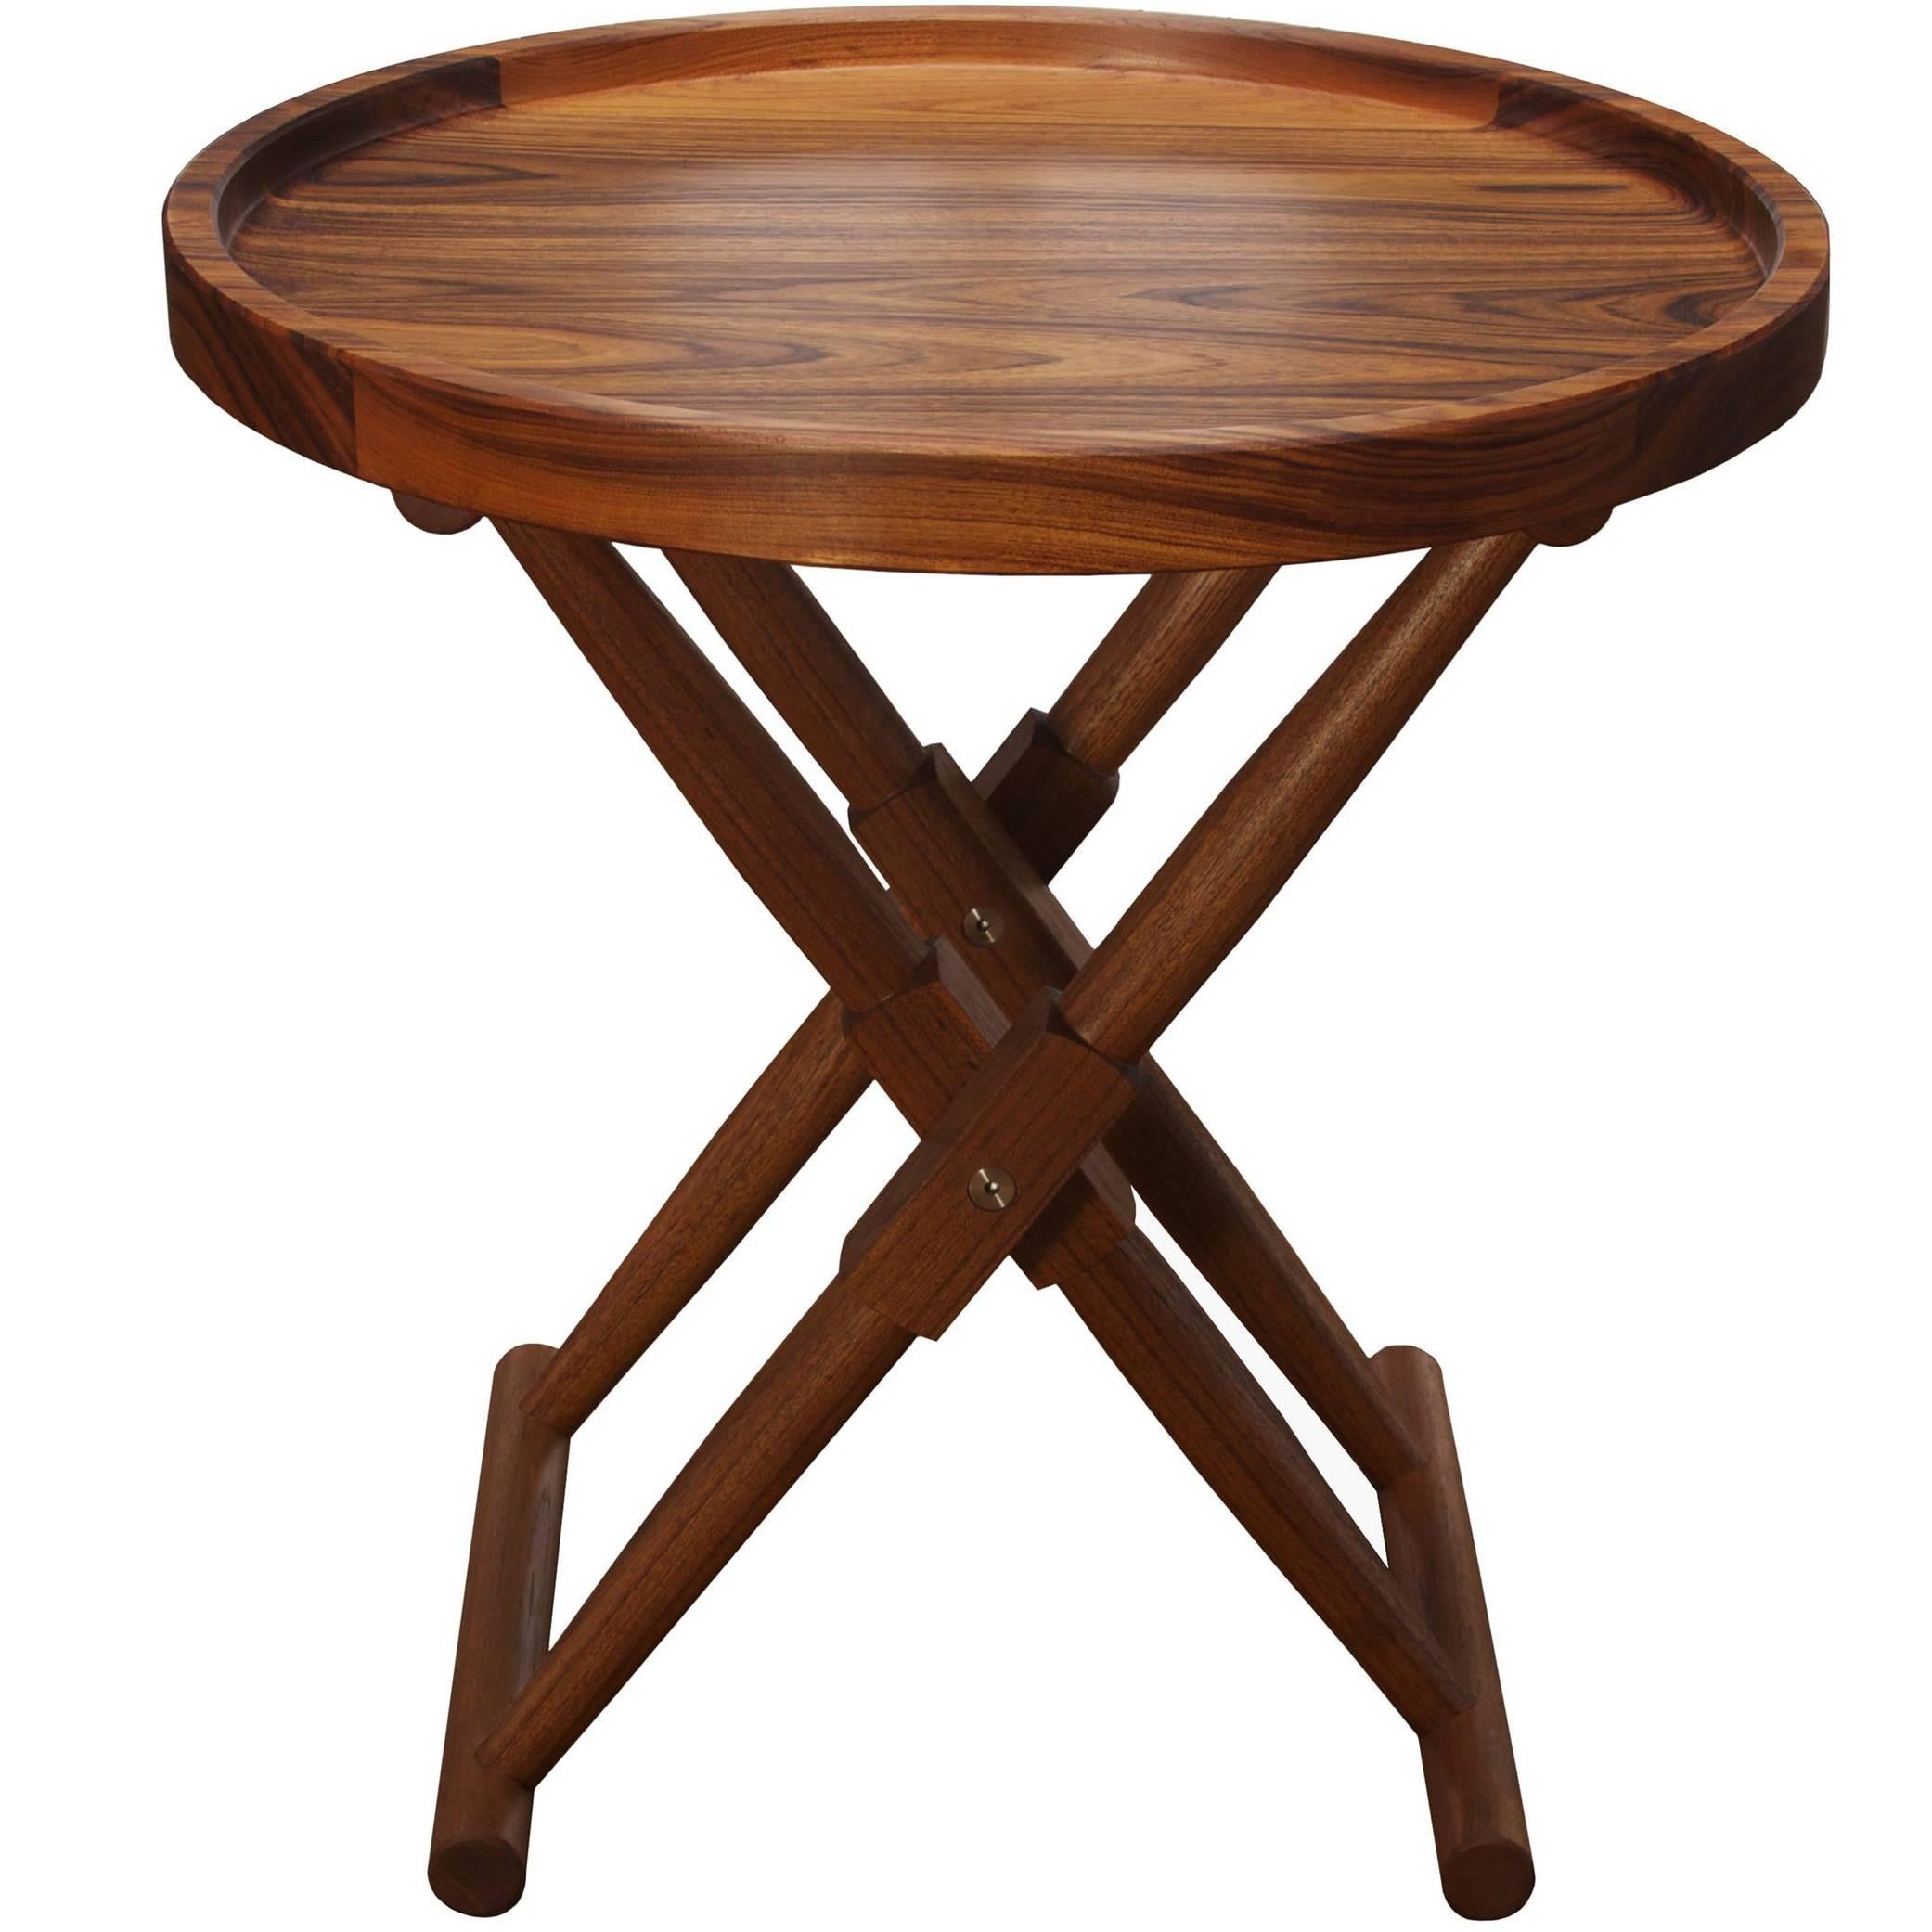 Matthiessen Round Tray Table - handcrafted by Richard Wrightman Design